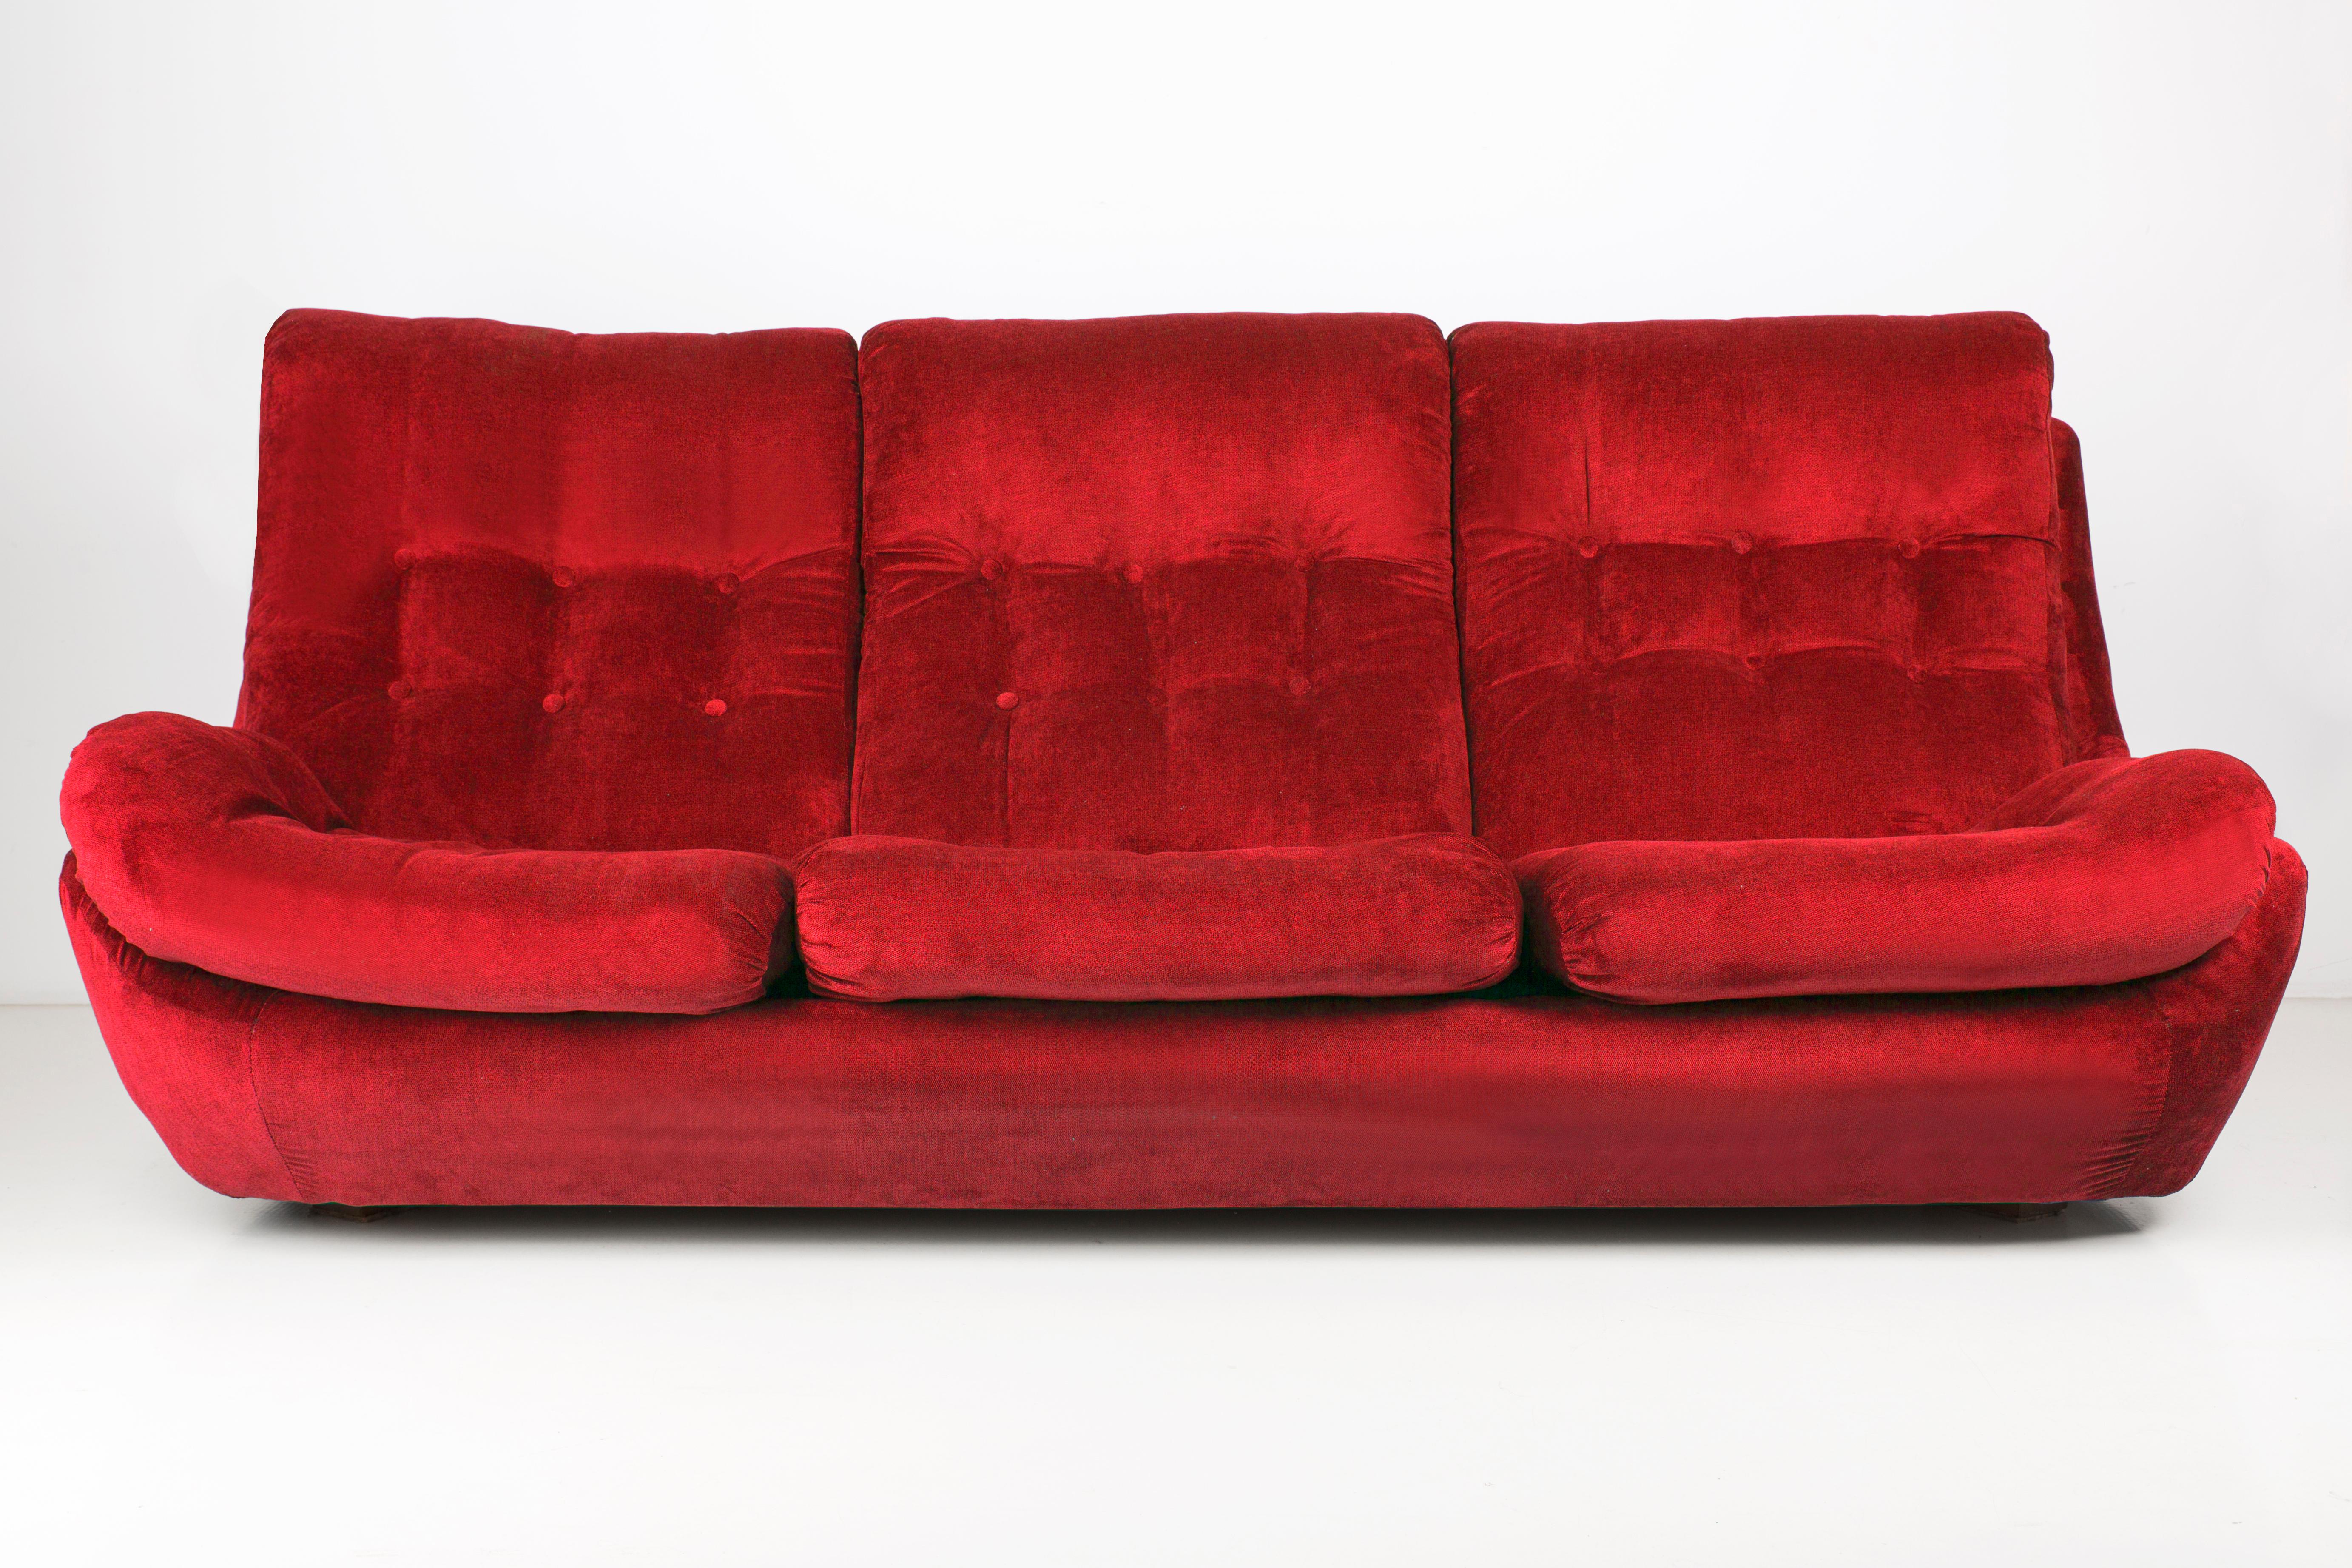 Atlantis sofa from the 1960s, produced in Czech Republic - at the moment they are unique. Due to their dimensions, they perfectly blend in even in small apartments providing comfort and beautiful decoration. Covered with high-quality velvet fabric,